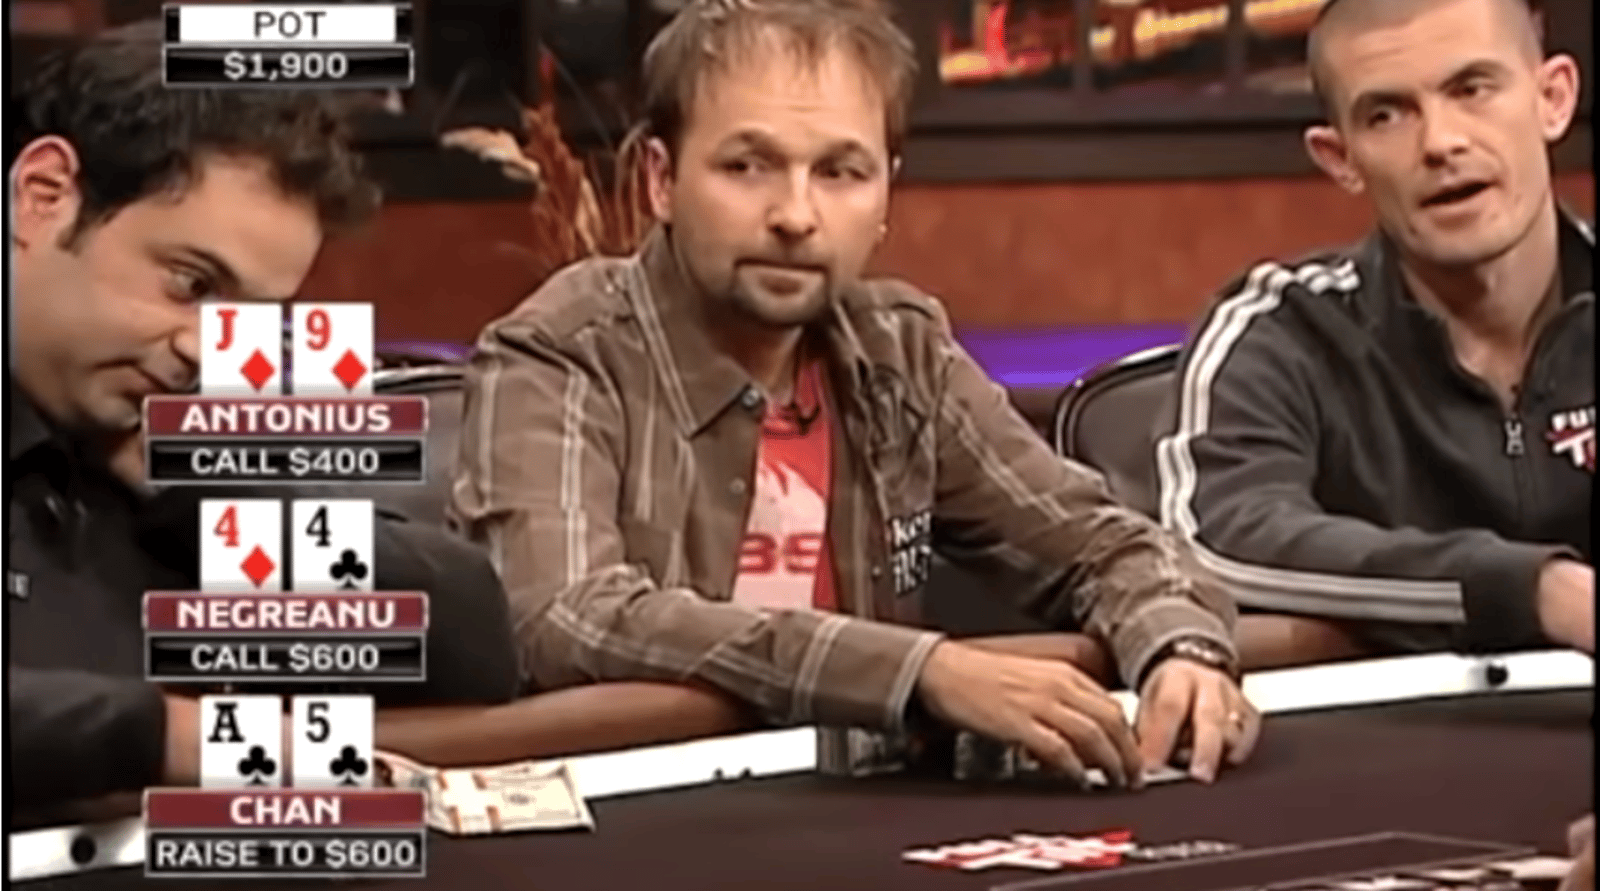 What The Vlog?: Negreanu Gets in "Poker After Dark" Mood